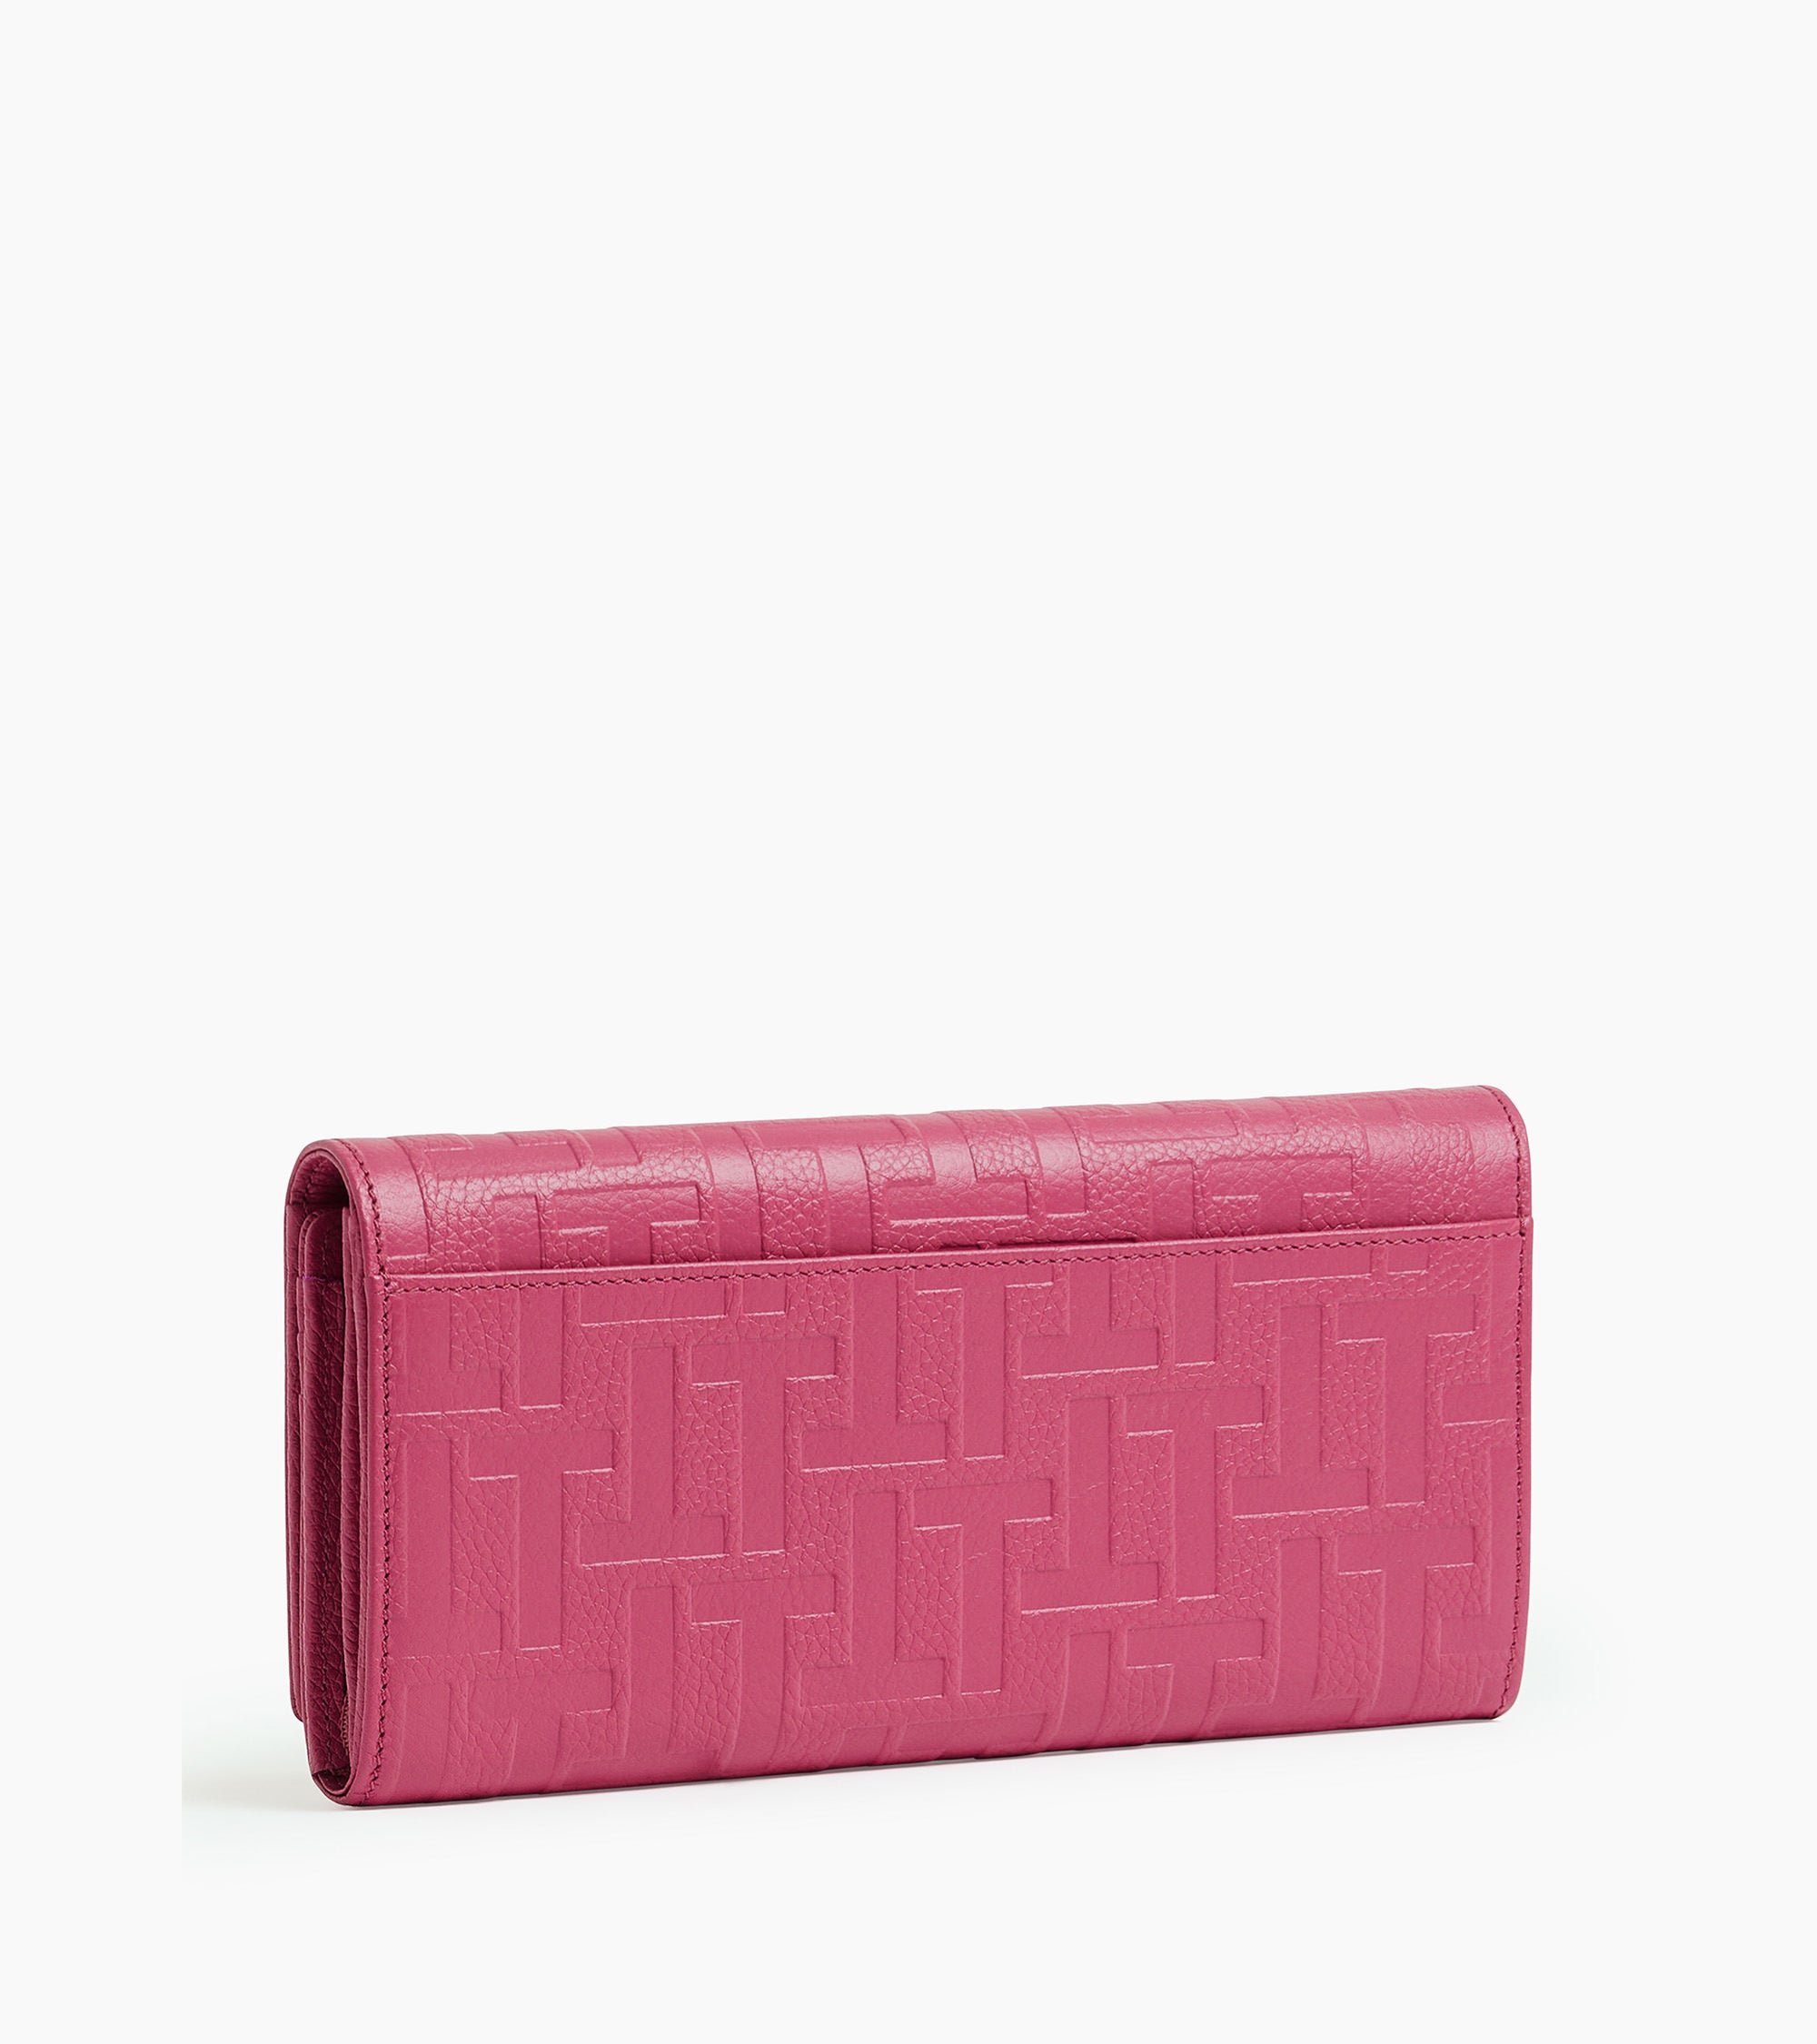 Emilie flap closure travel companion in embossed T leather